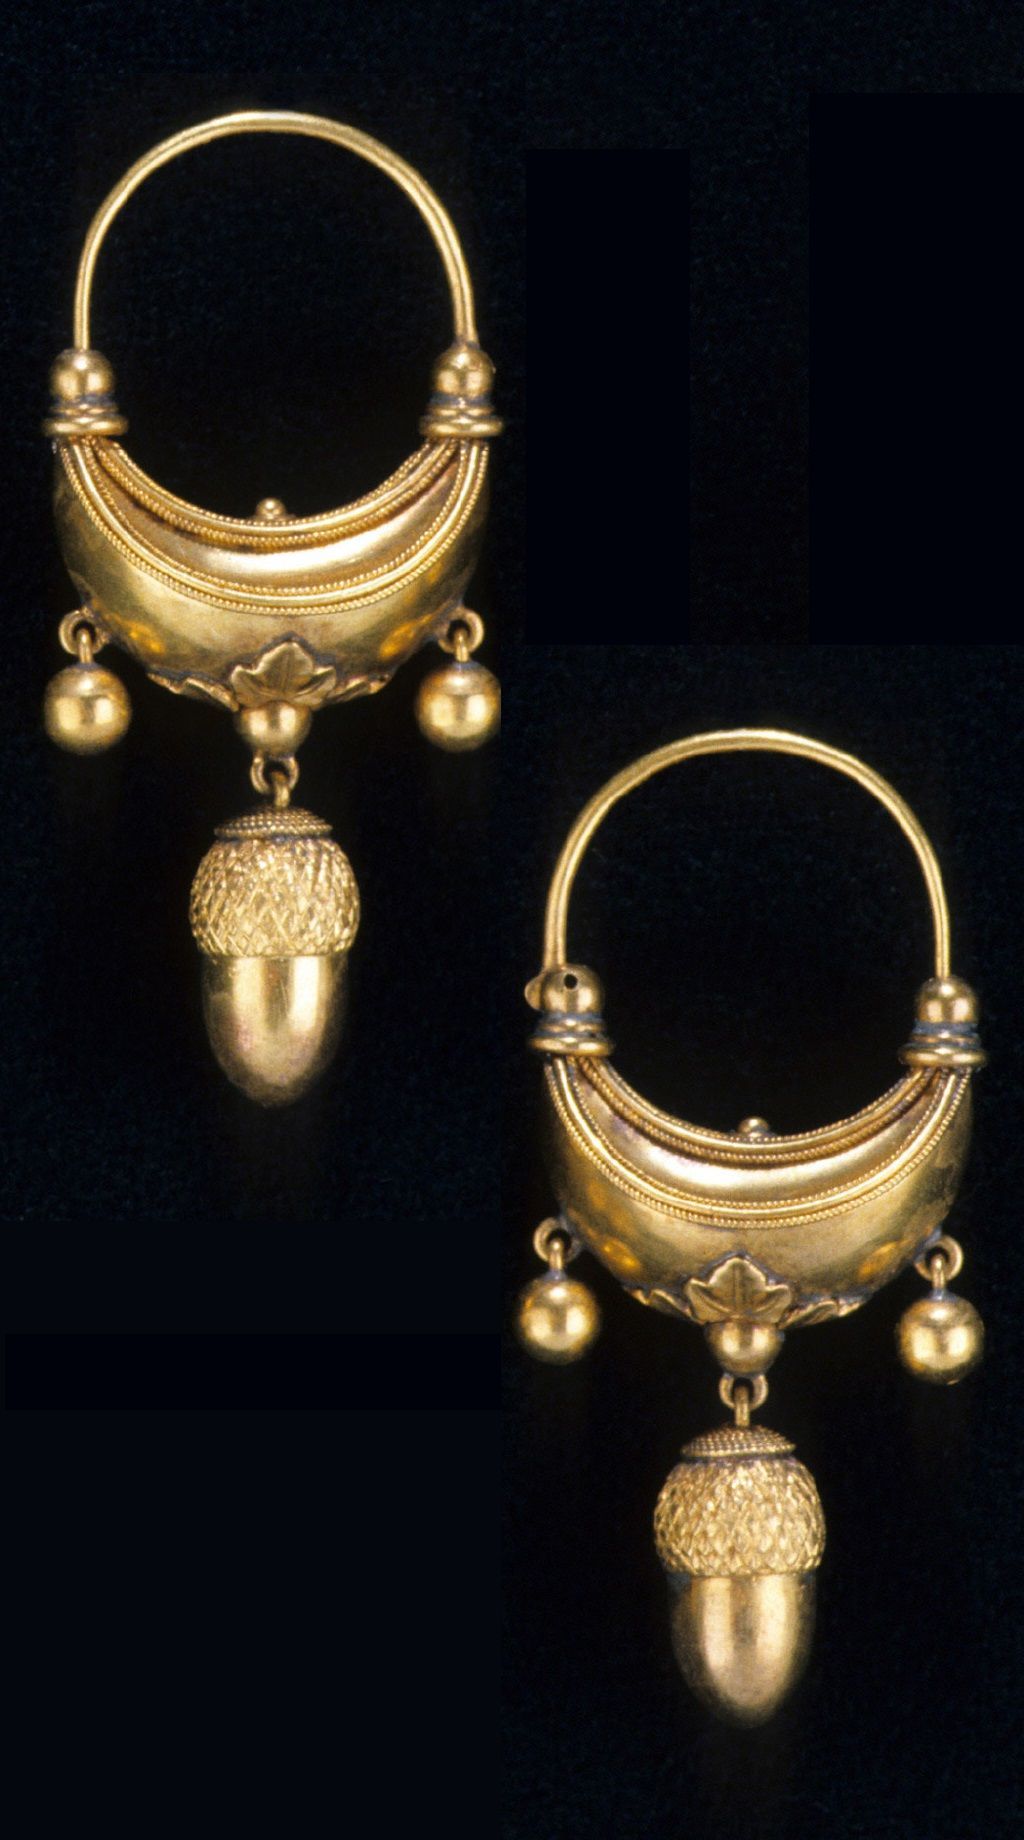 A Look into the History of Antique
Earrings